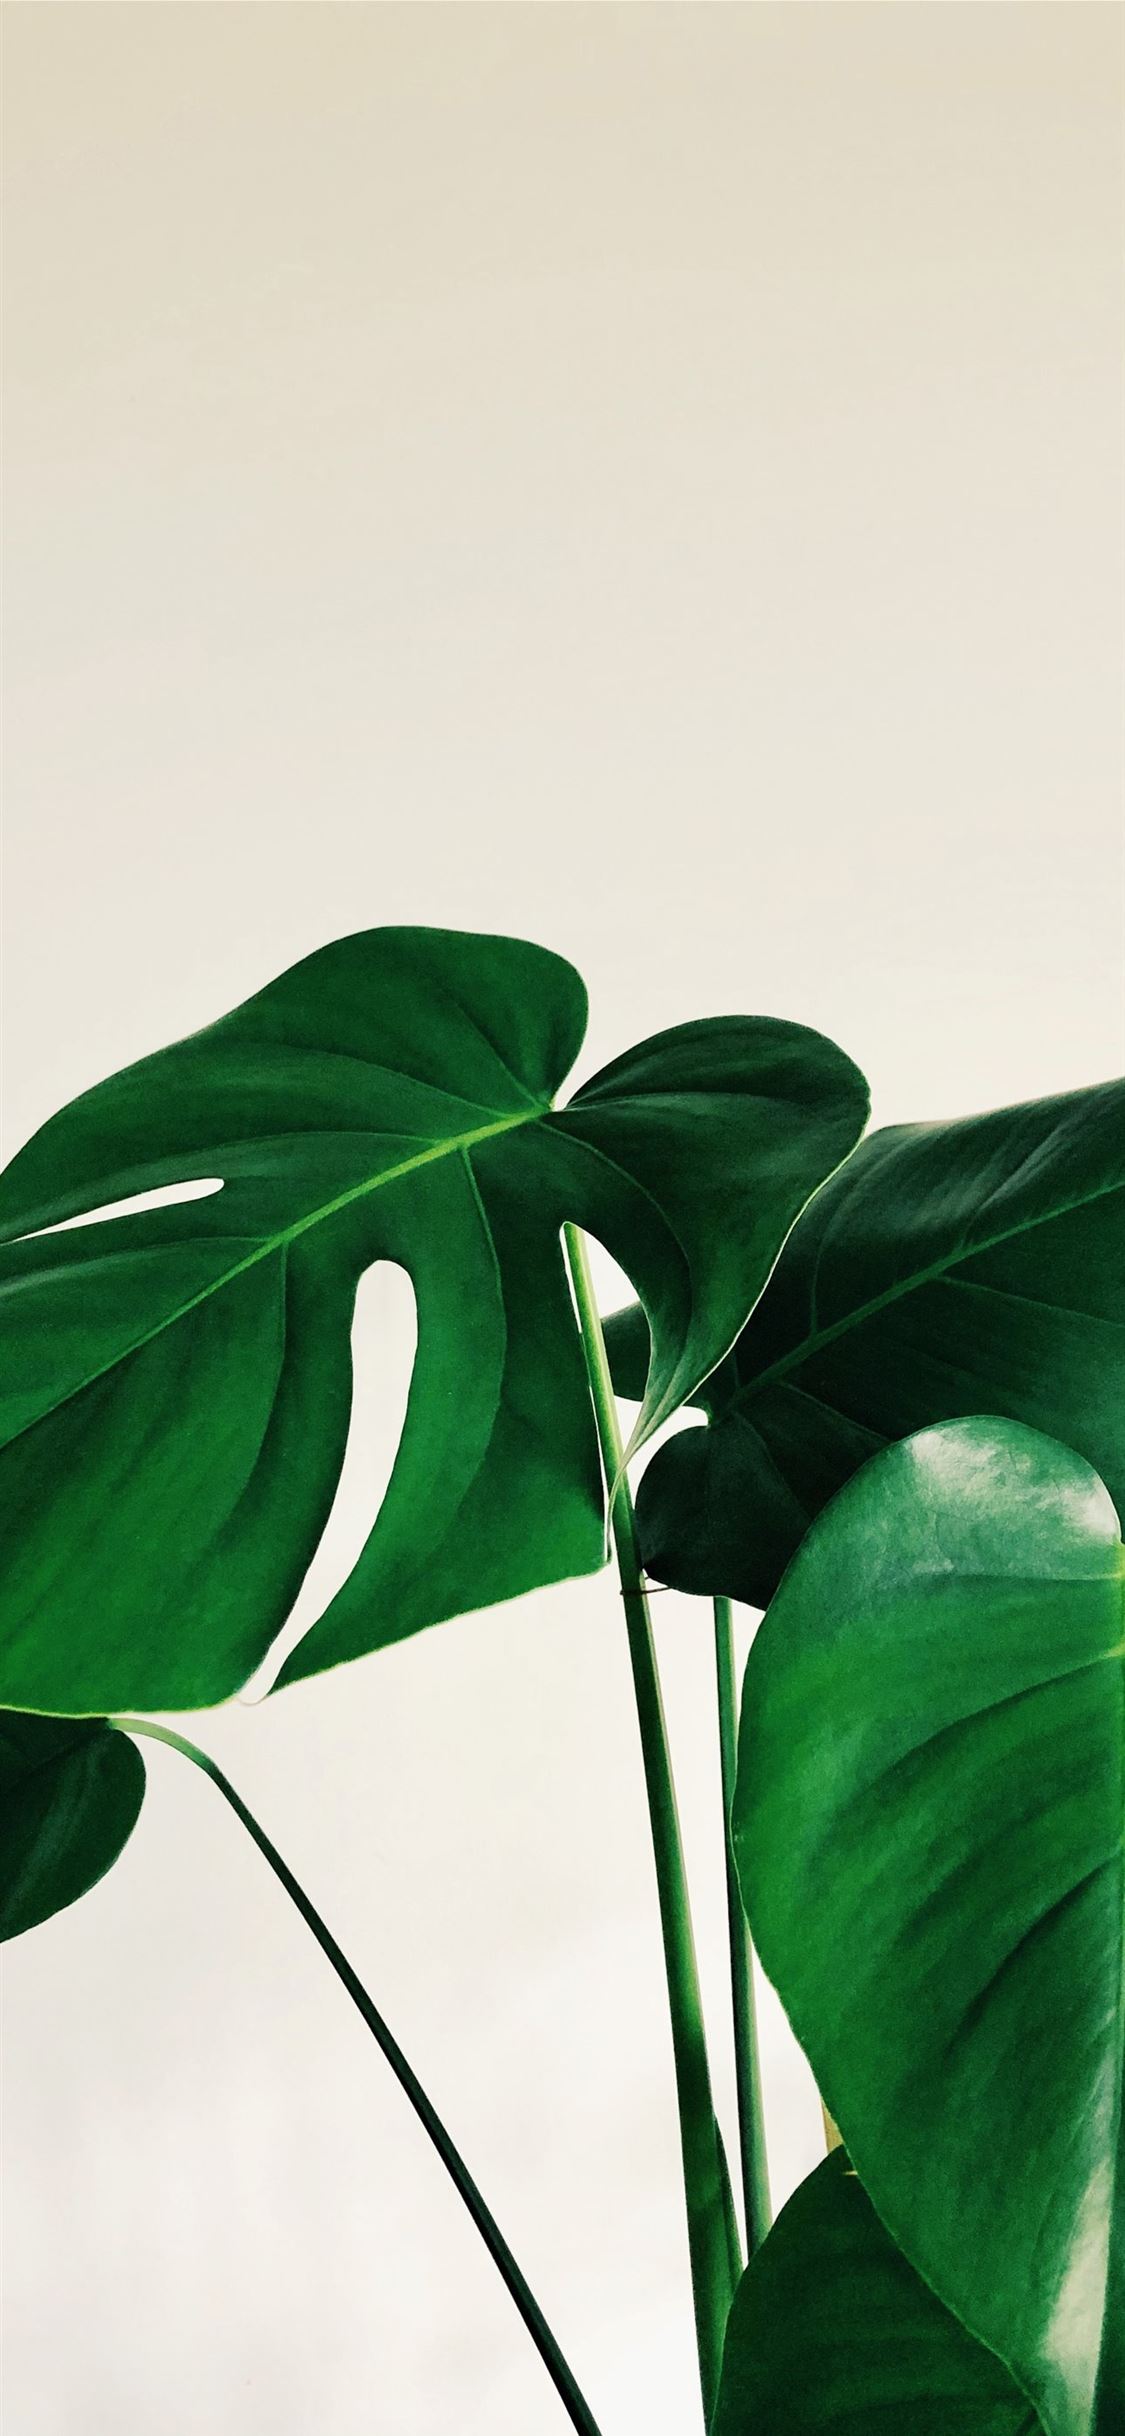 green leaves on white background iPhone wallpaper 